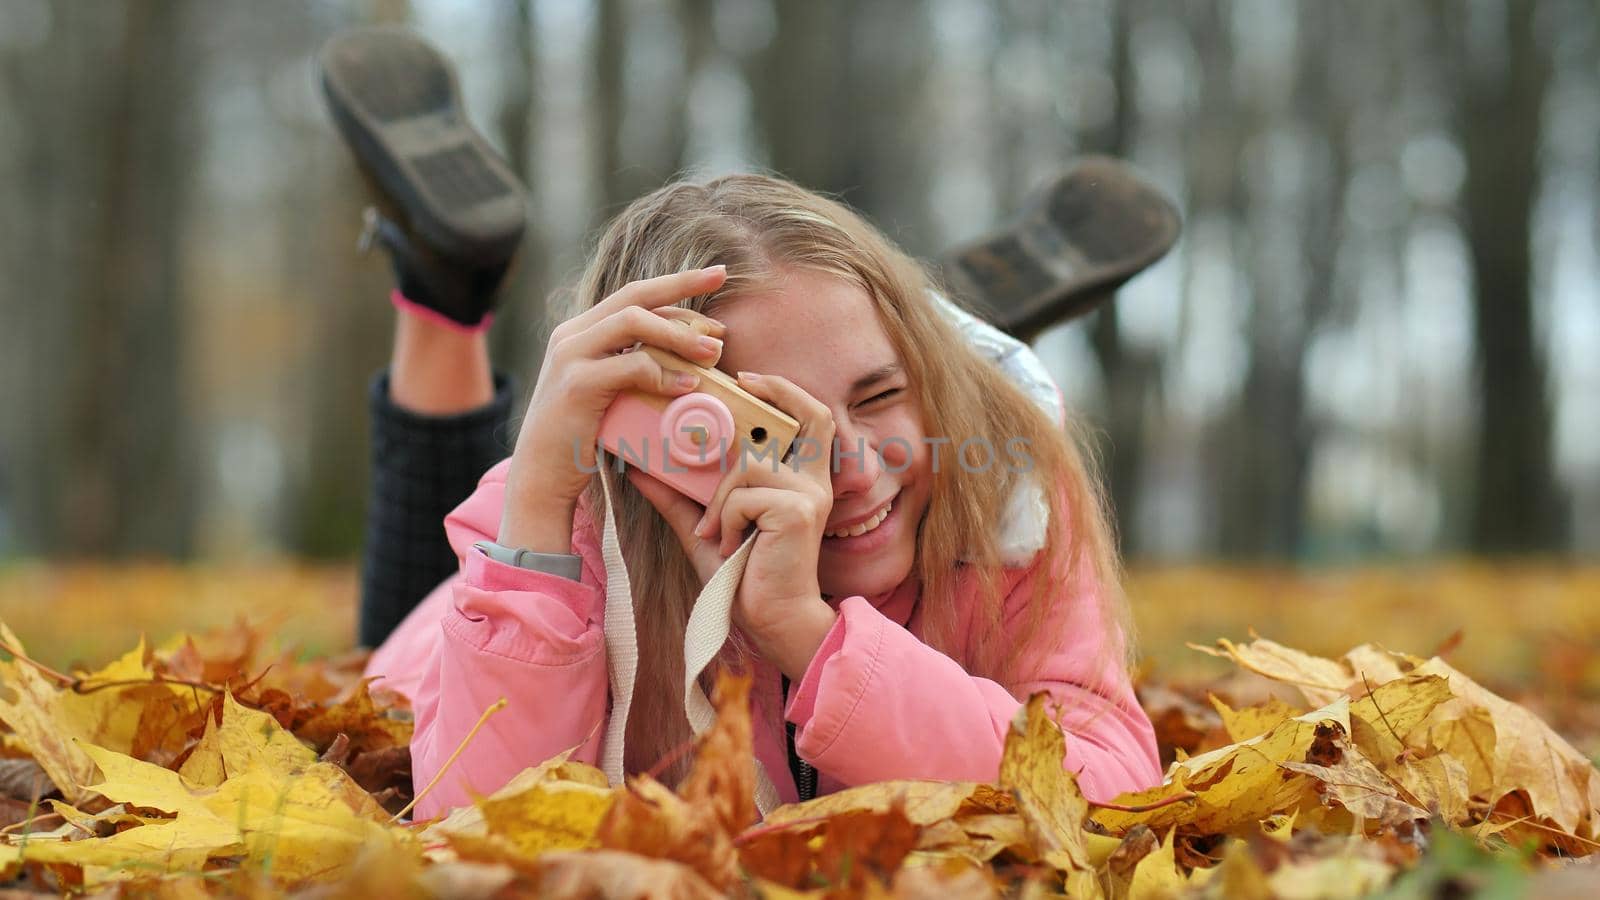 A teenage girl with a toy camera takes pictures of lying in the autumn foliage in the park